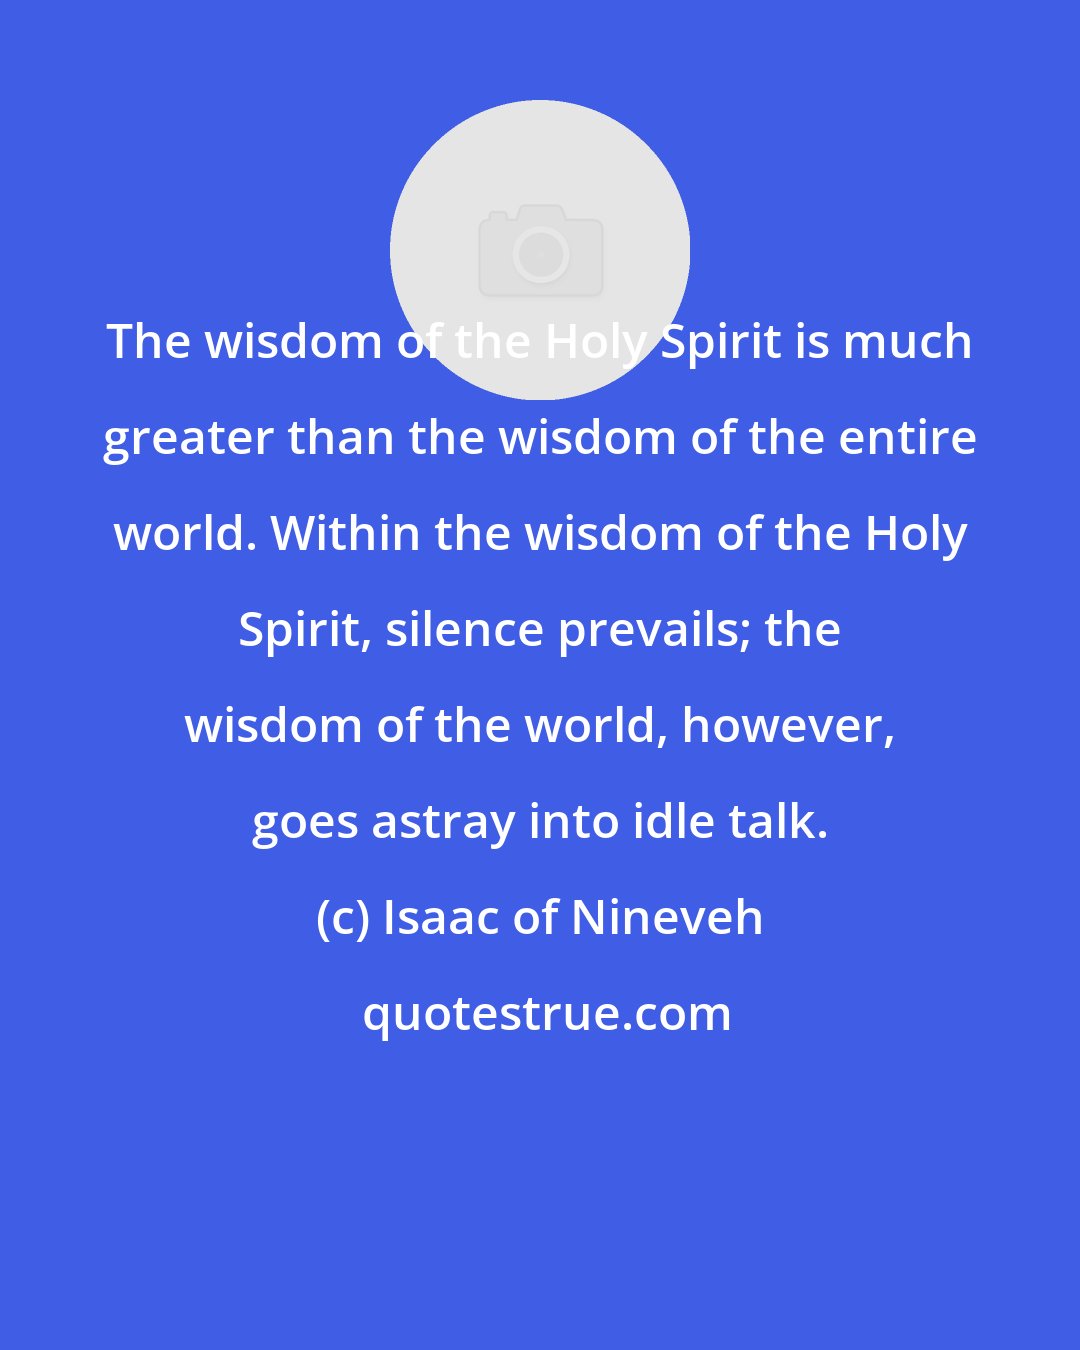 Isaac of Nineveh: The wisdom of the Holy Spirit is much greater than the wisdom of the entire world. Within the wisdom of the Holy Spirit, silence prevails; the wisdom of the world, however, goes astray into idle talk.